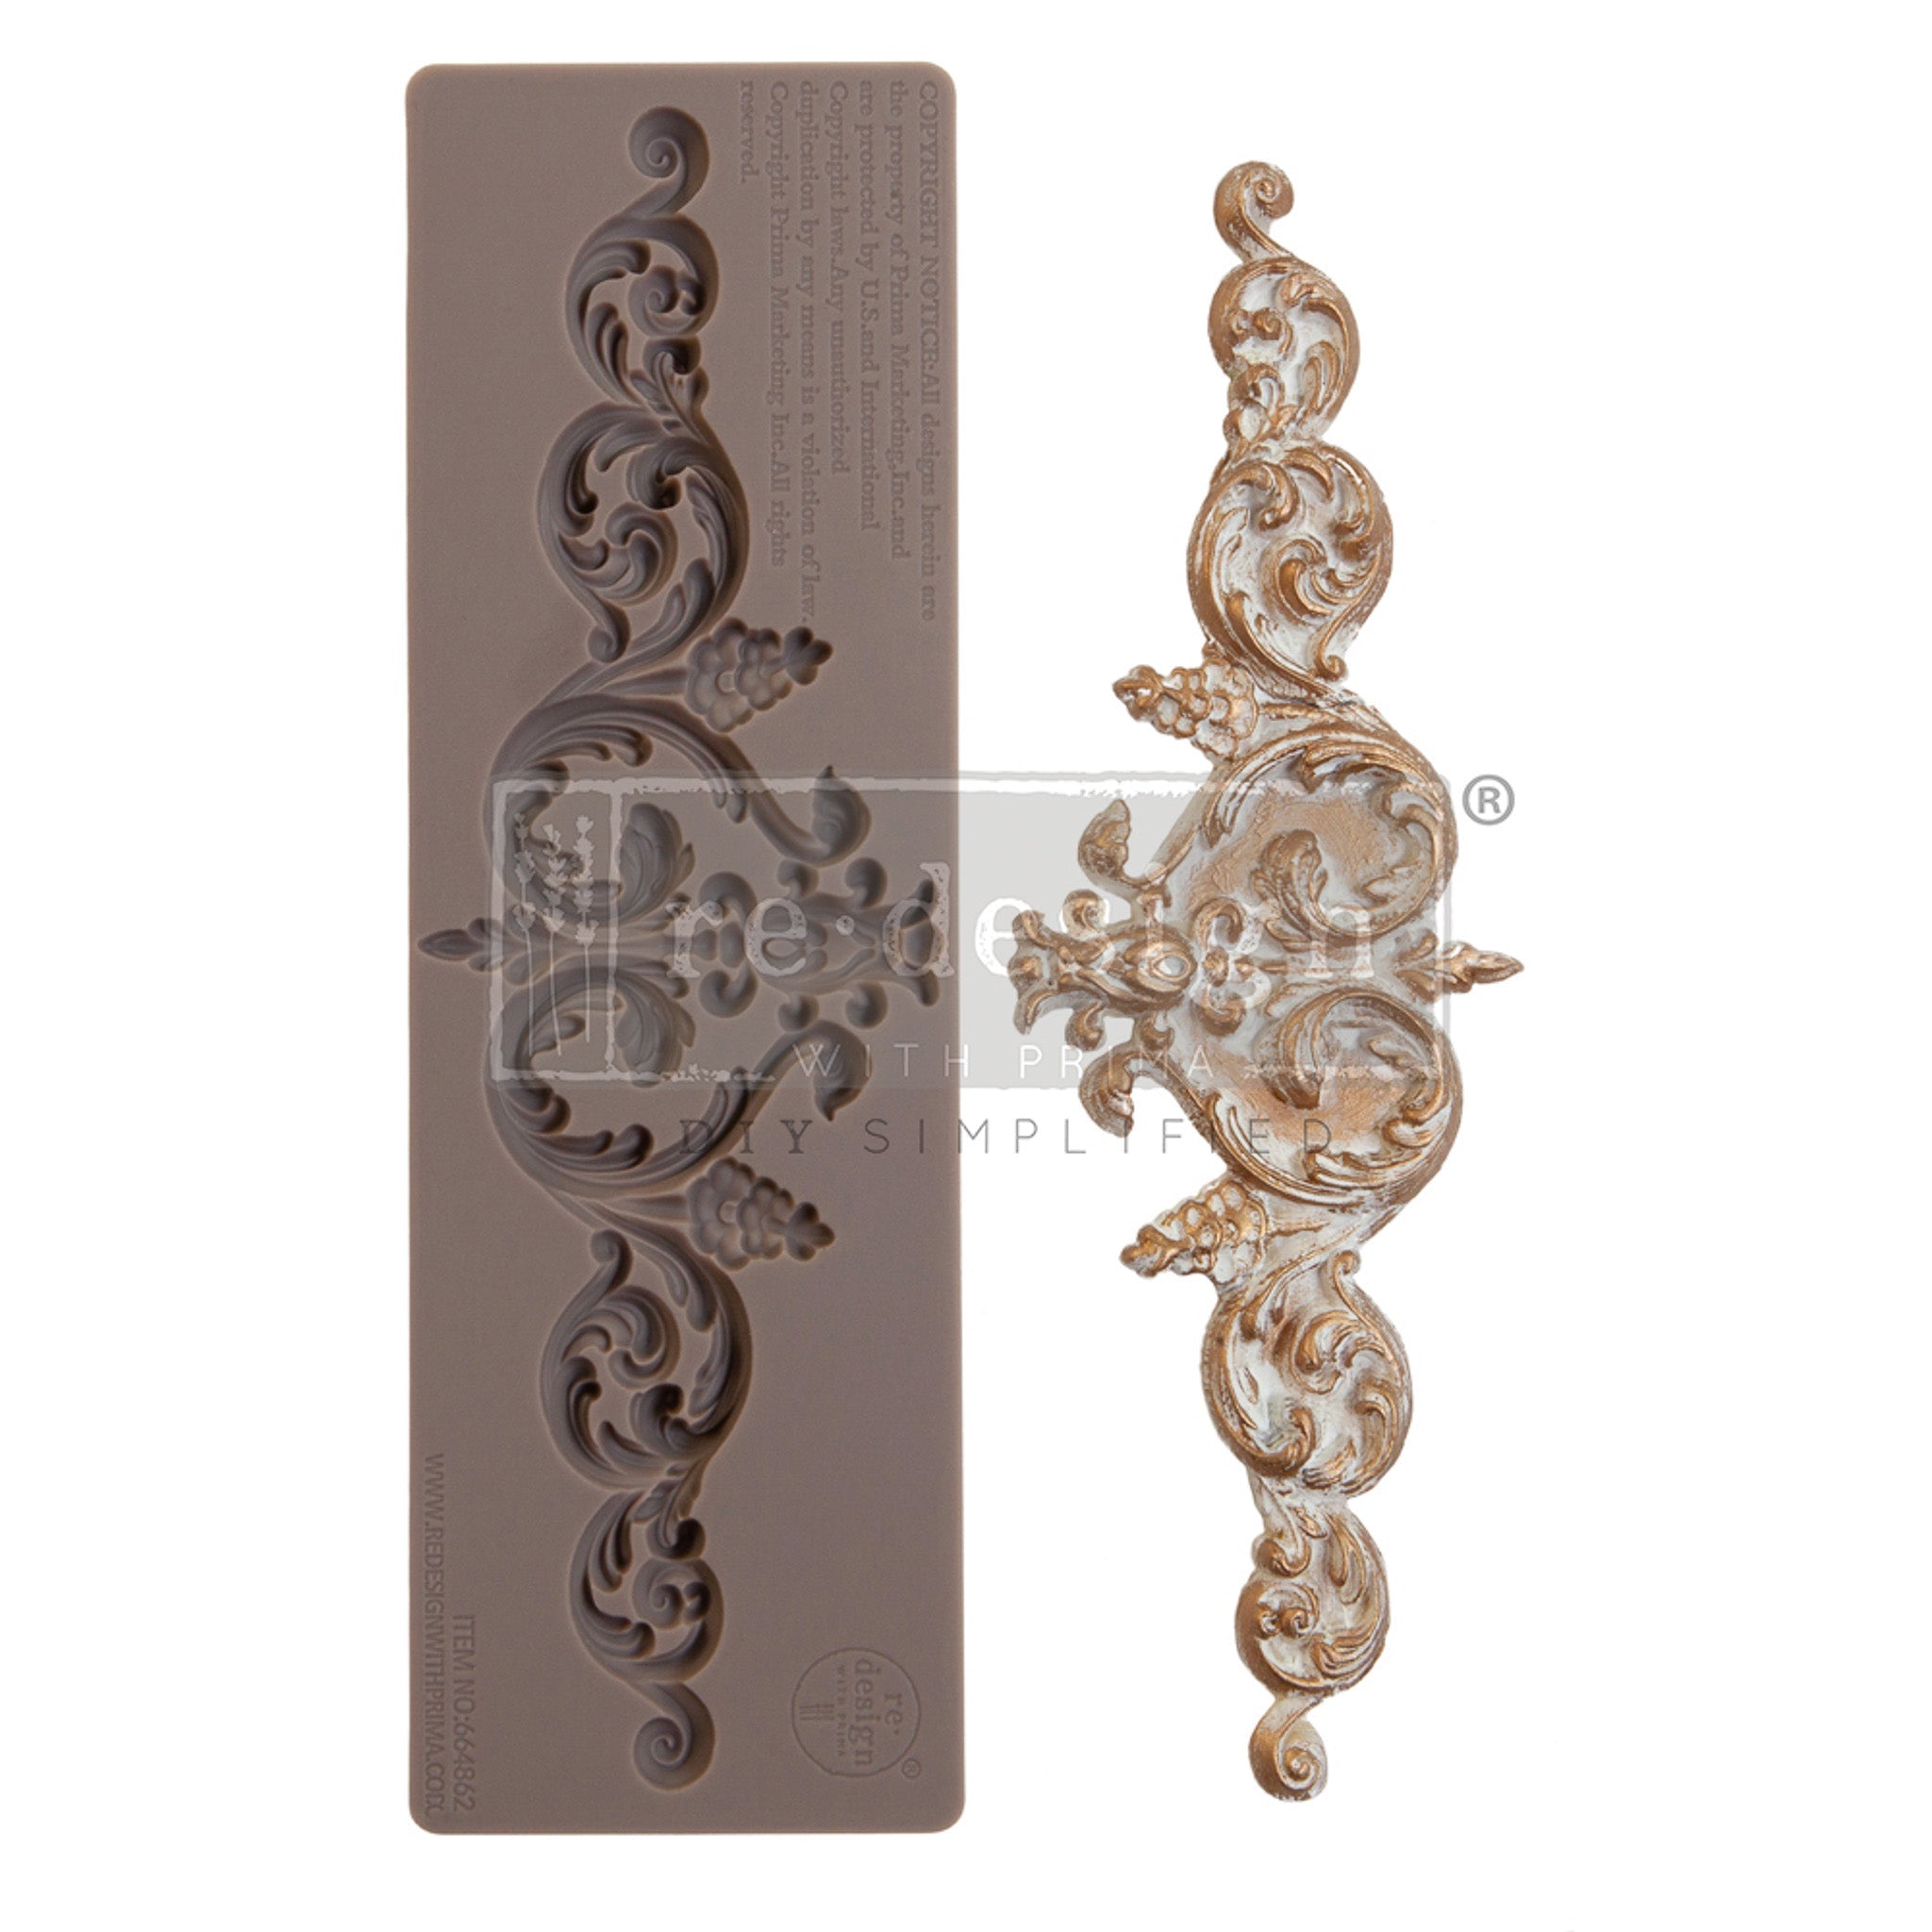 A brown silicone mould and a gold and white colored casting of an ornate scroll plate.